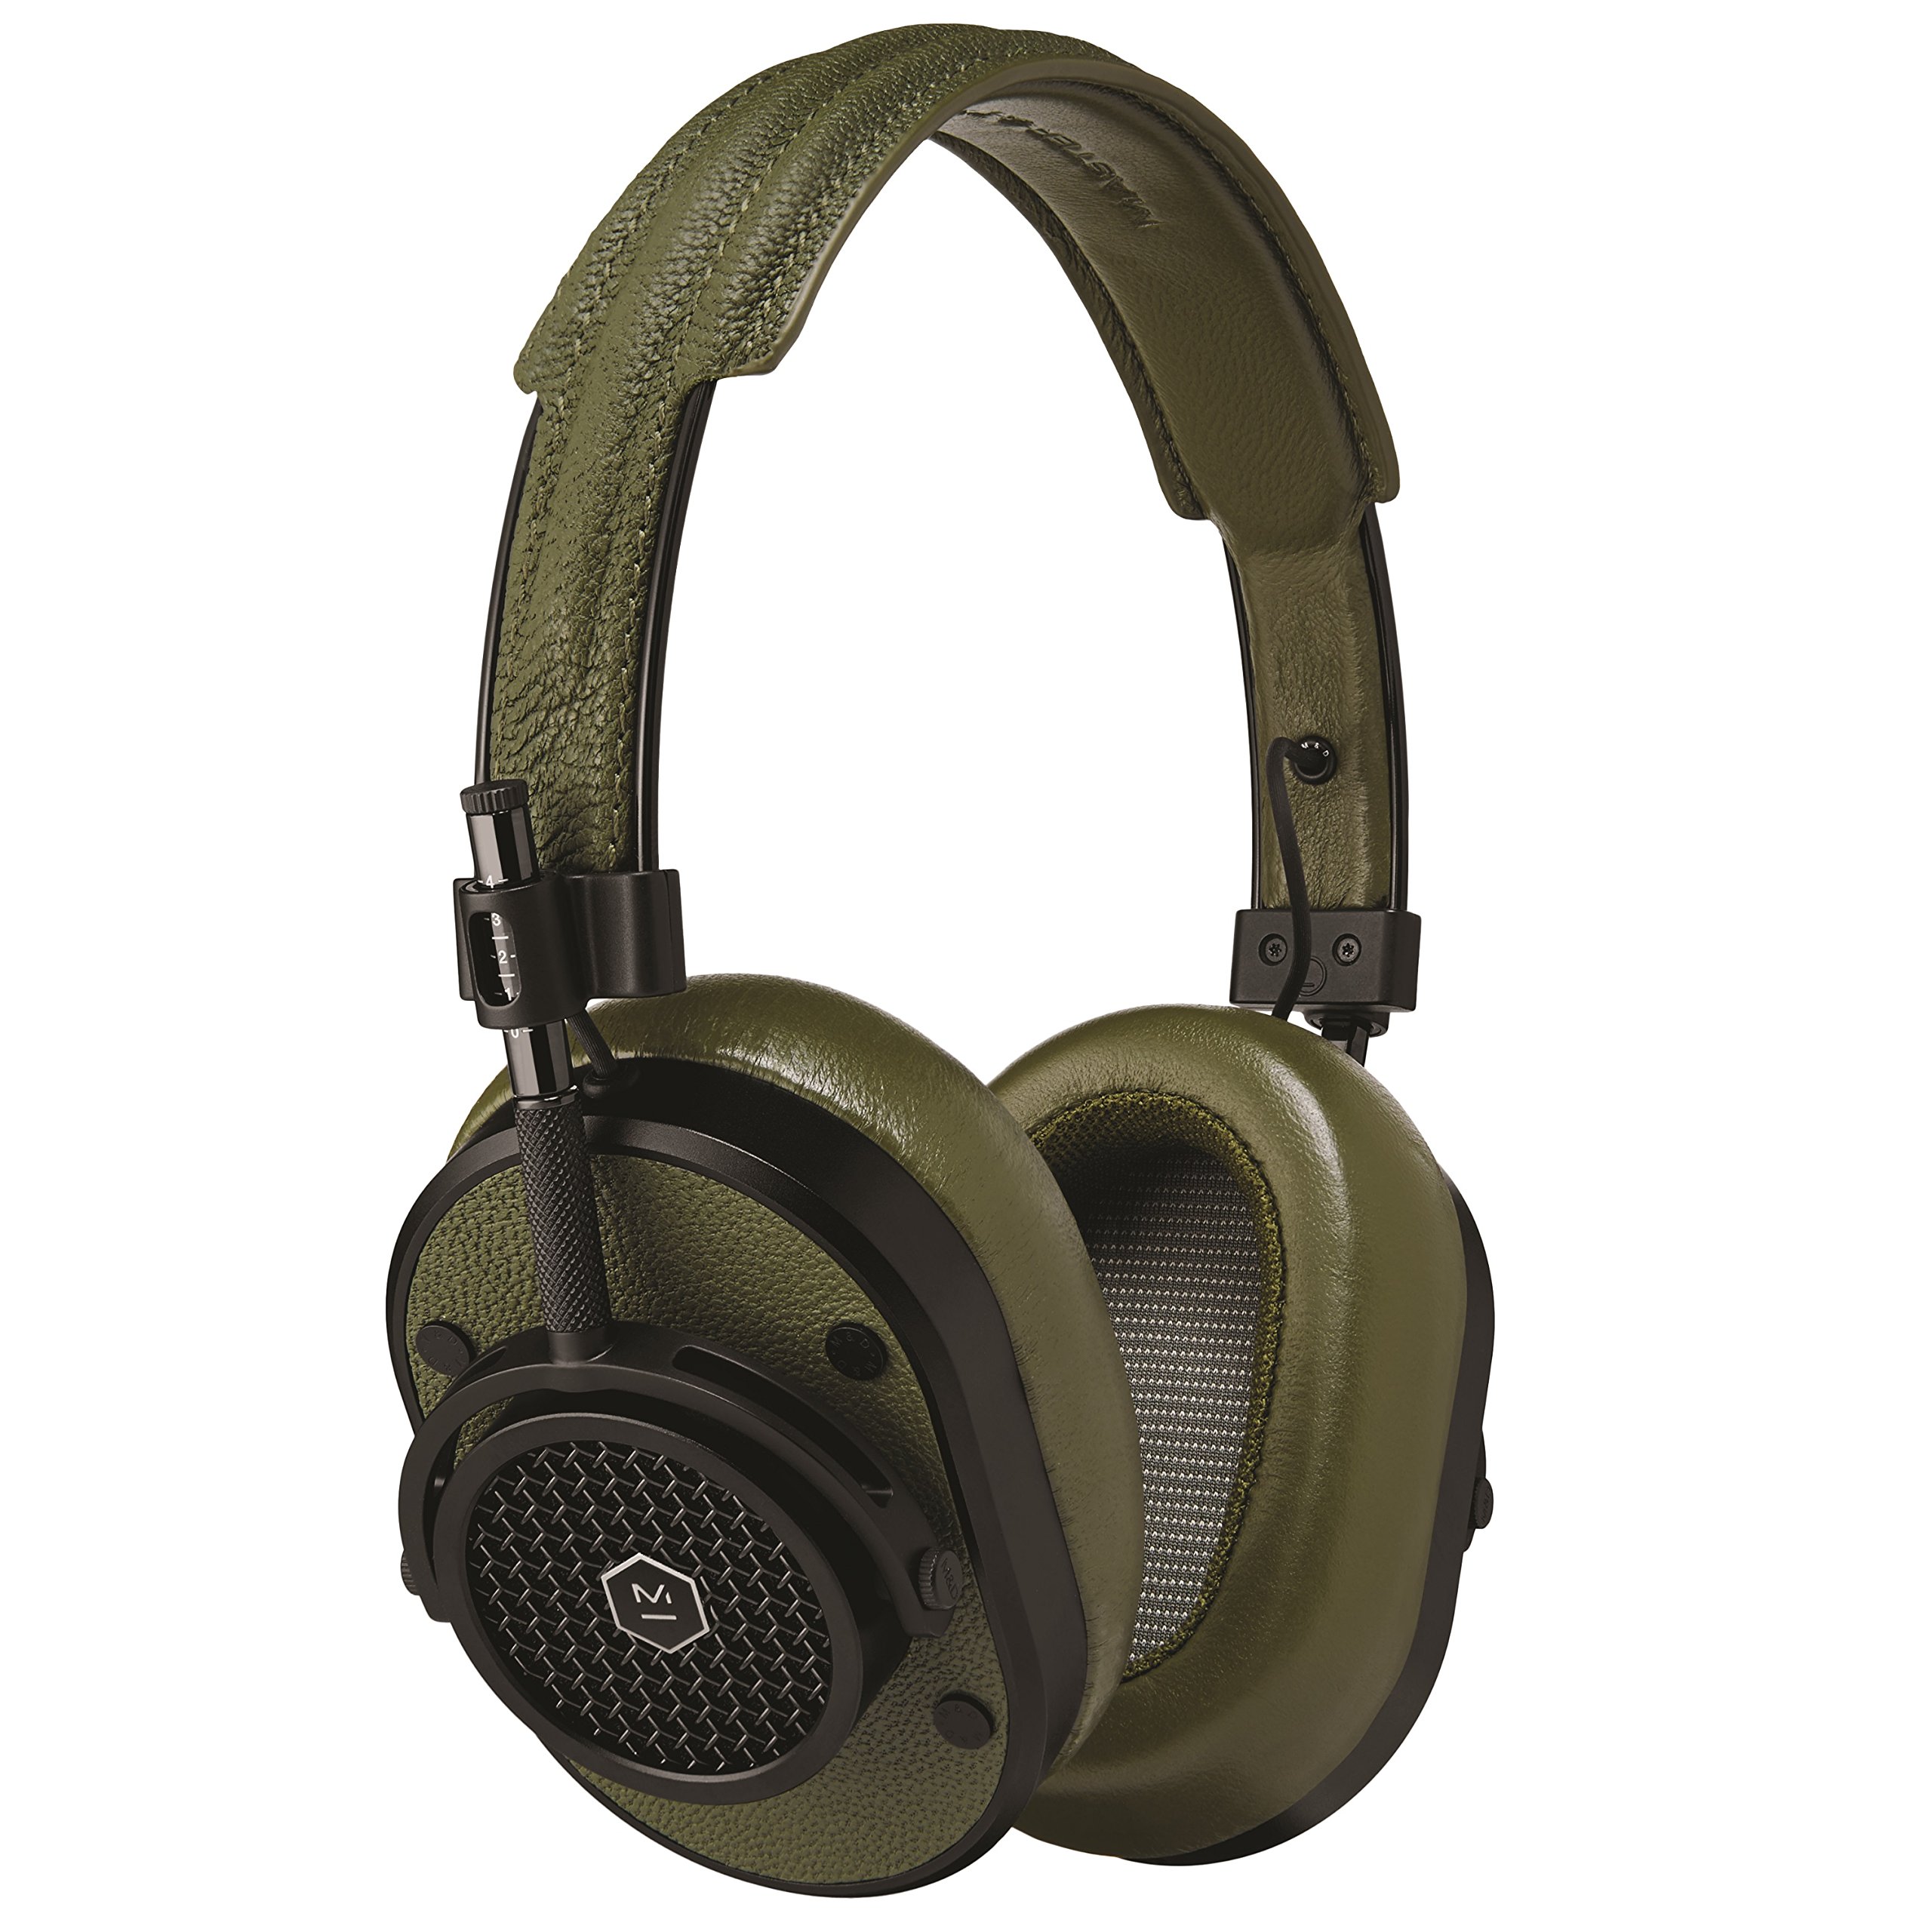 Over-Ear Headphones with Wire - Noise Isolating with Mic Recording Studio Headphones with Superior Sound